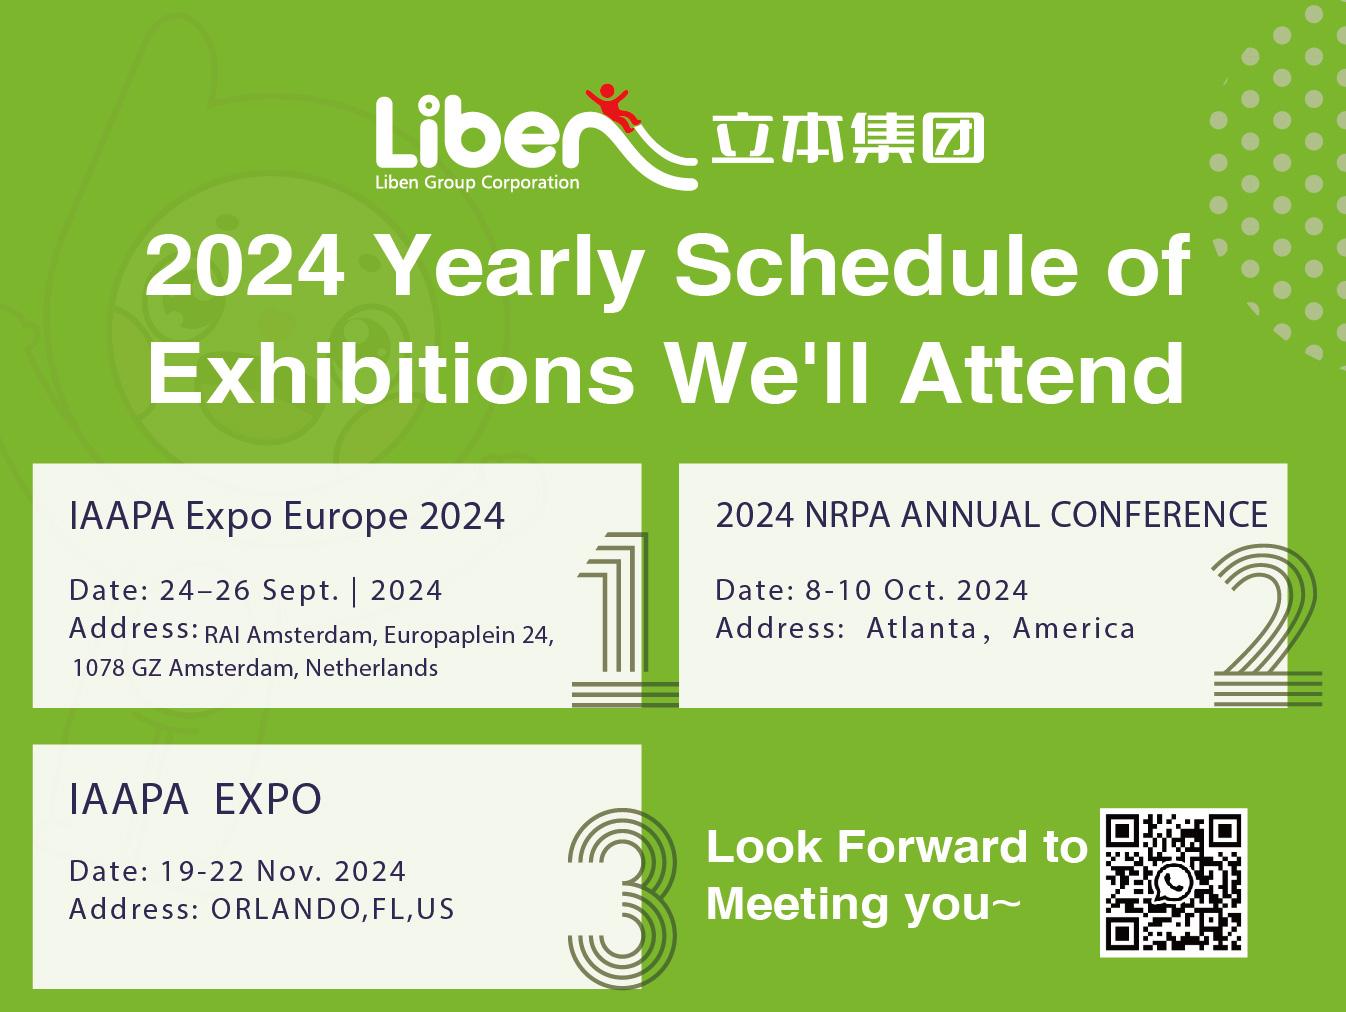 Liben Group Exhibition Schedule For The Second Half of 2024